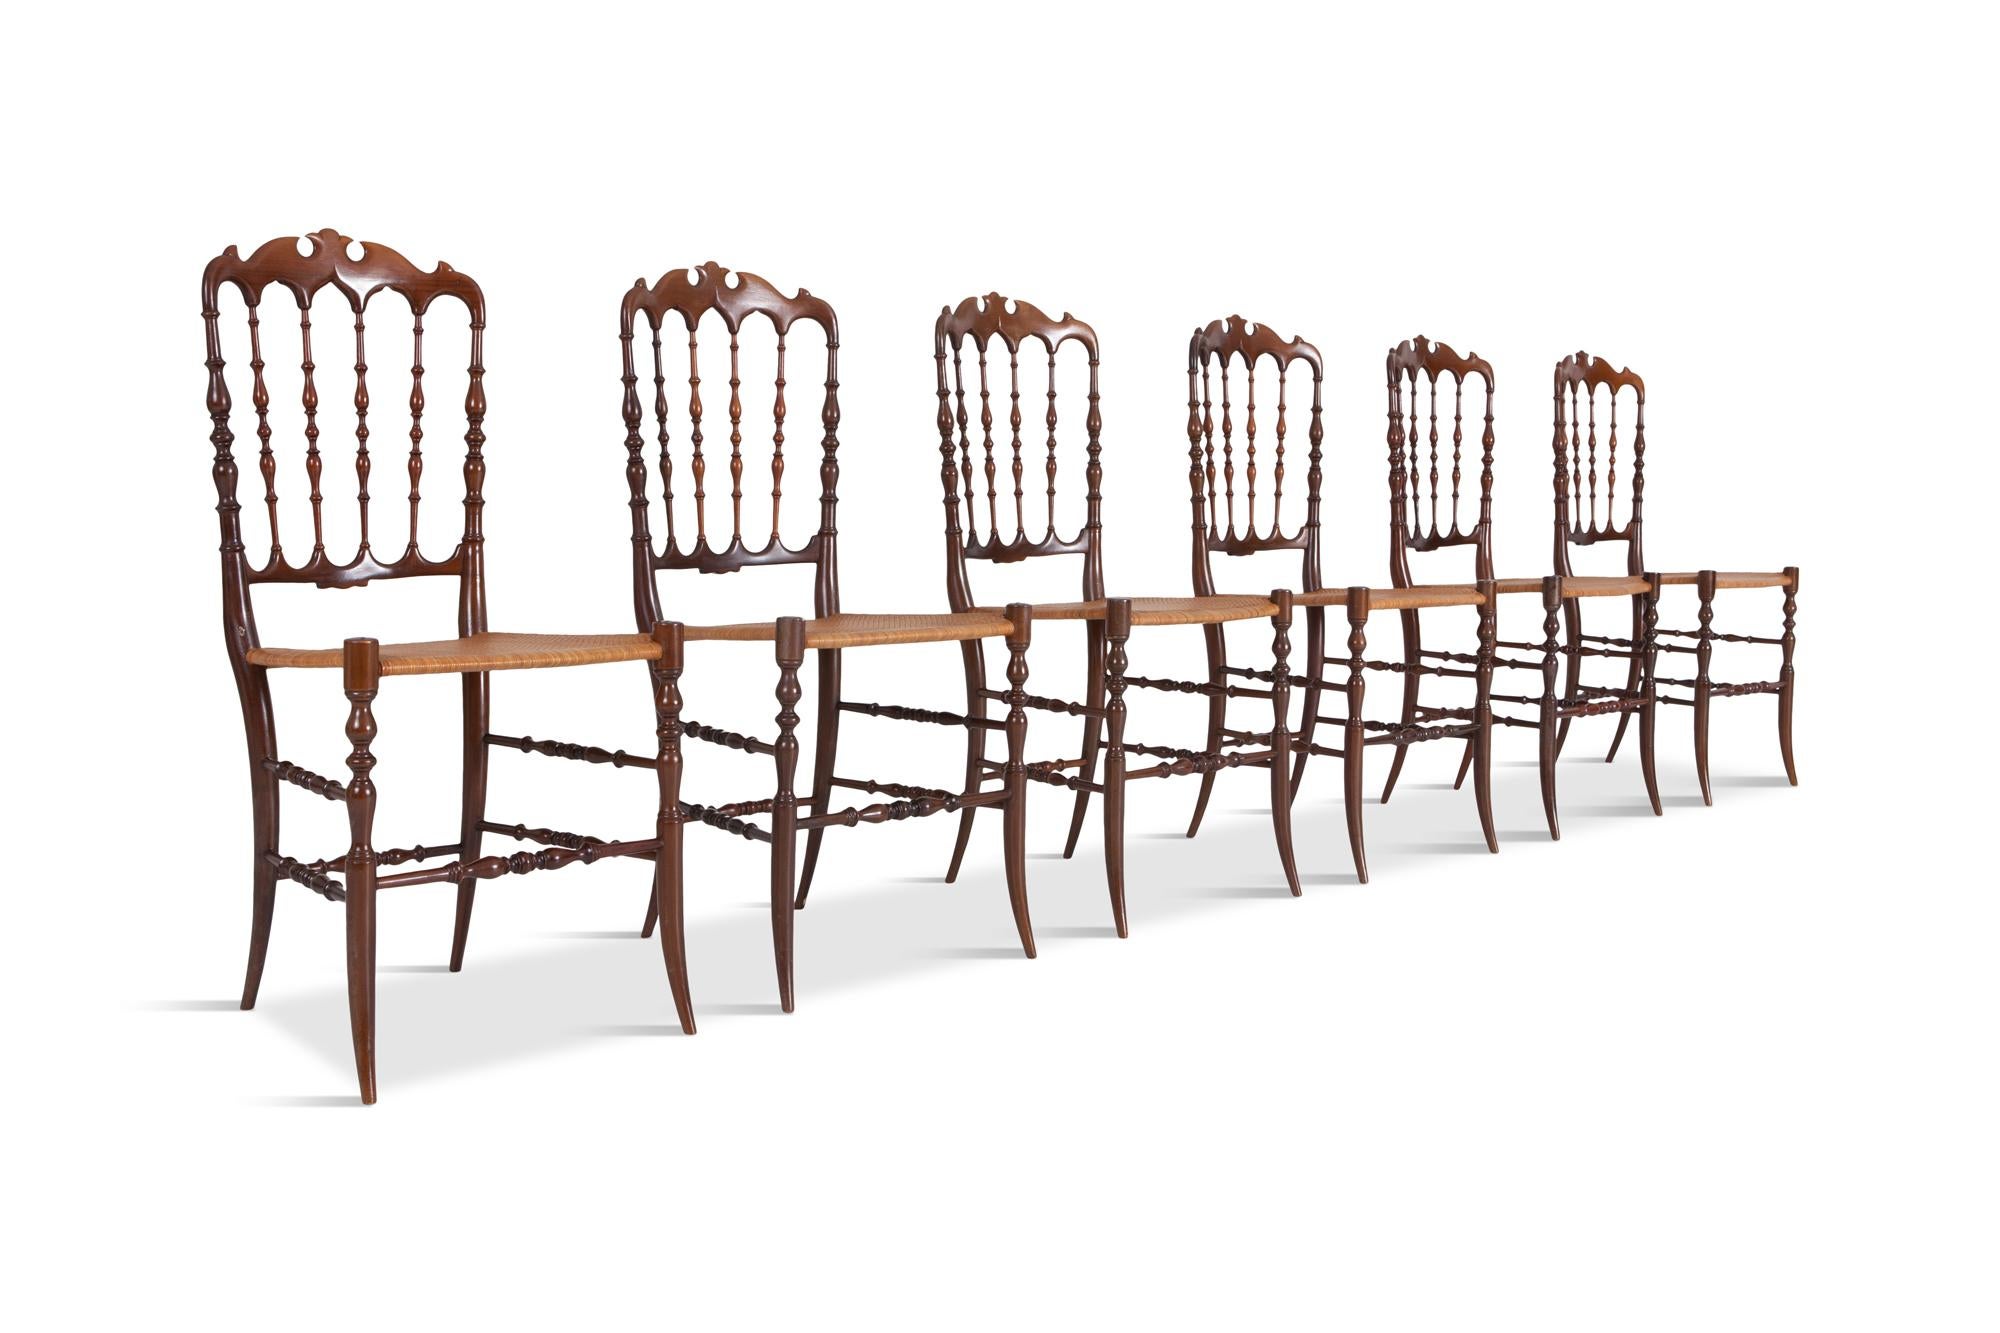 Cherrywood lightweight dining chairs, set of six. 

Provided with a beautiful crest rail, spindled back and woven wicker seats. The front legs continue the spindled technique. This Chiavari chair was originally designed by Giuseppe Gaetano